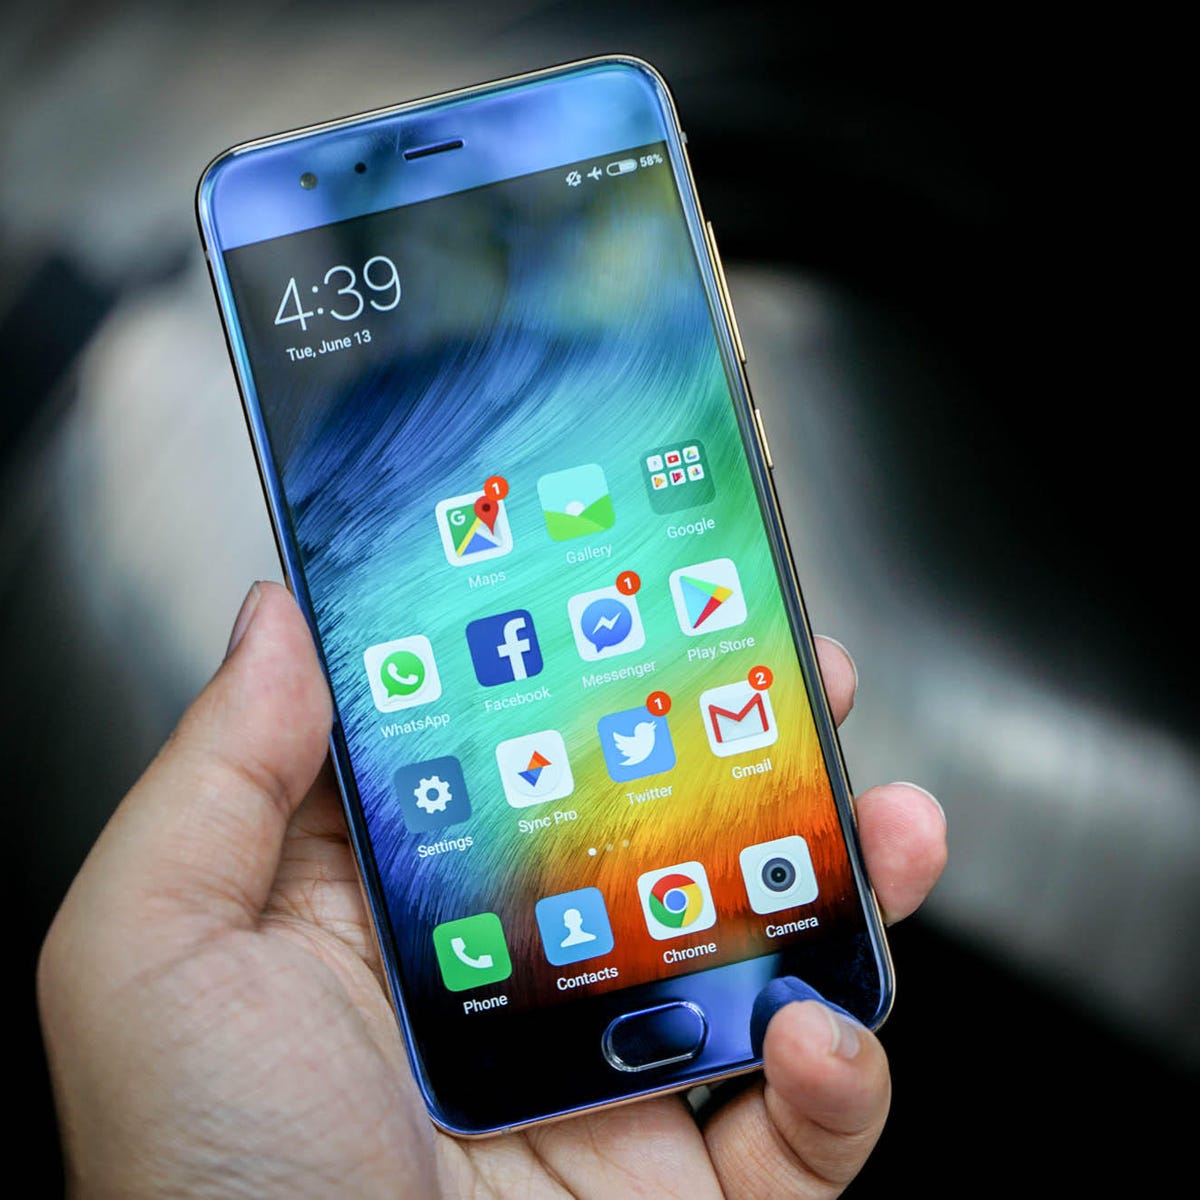 Xiaomi Mi 6 review: The best phone you can't buy (for now) - CNET